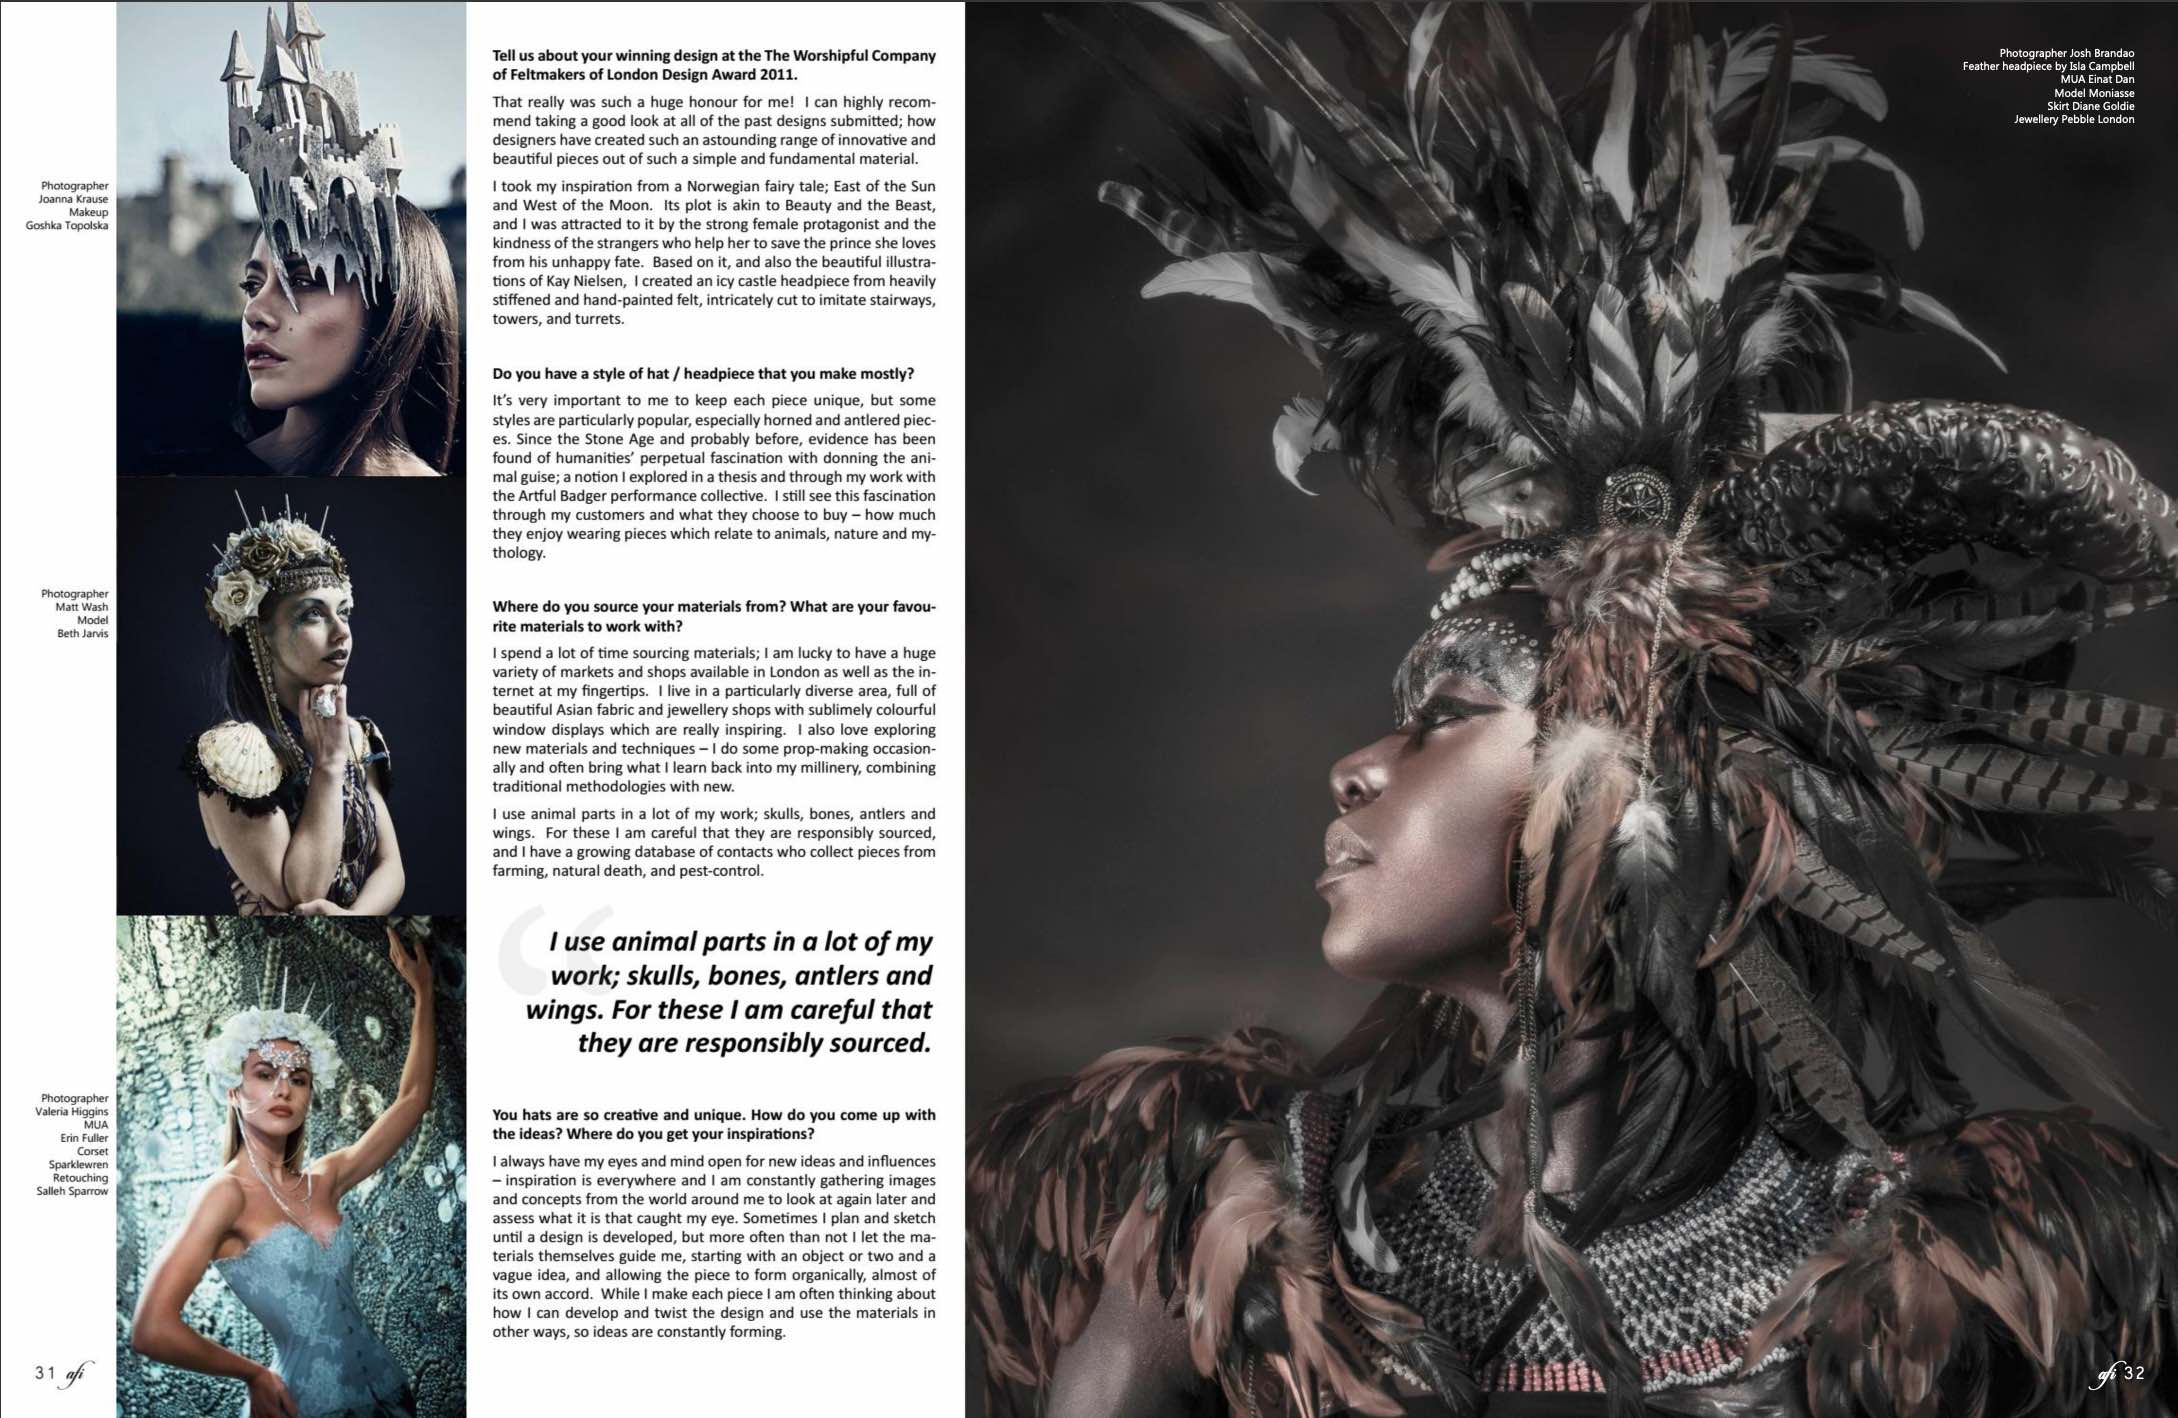 Afi Mag Magazine Isla Campbell Millinery Interview Crowns of Imagination